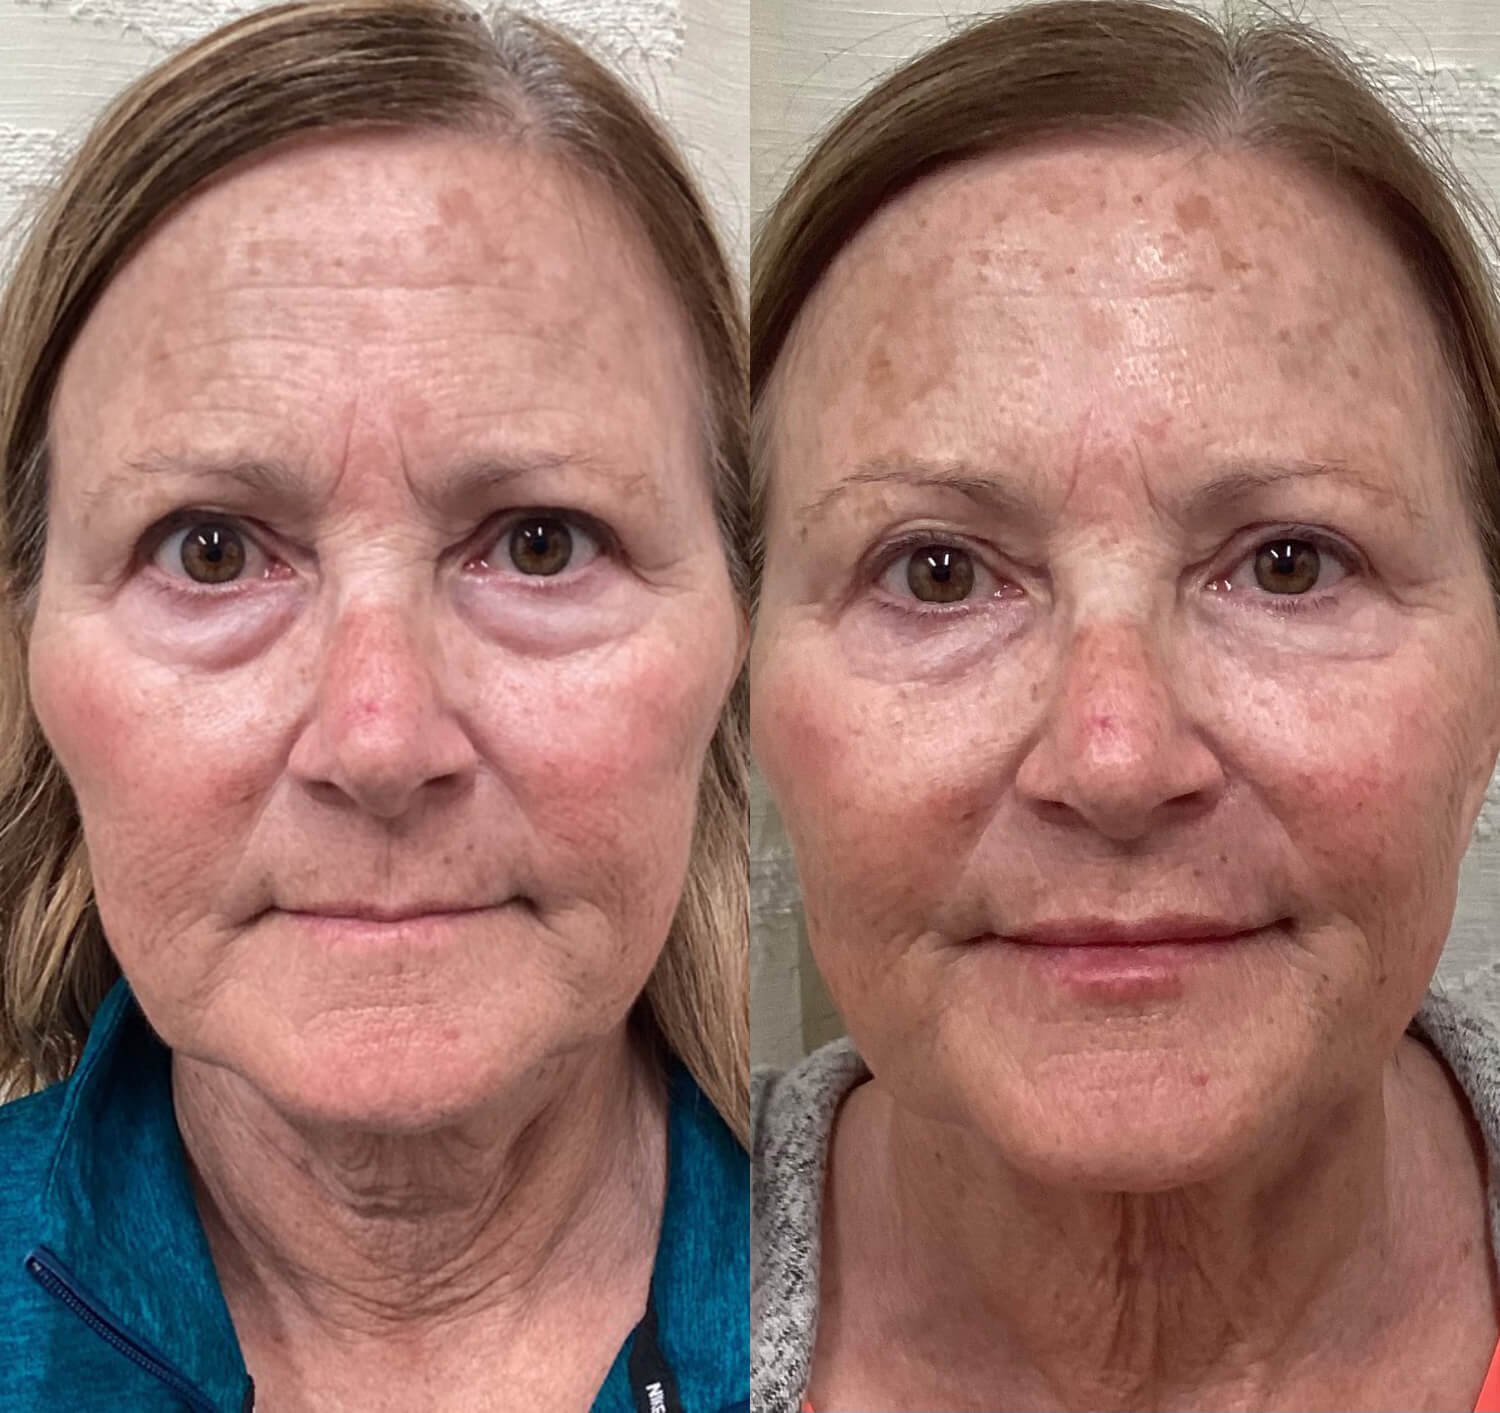 Maggie Cadavero botox for under eye wrinkles when smiling before and after.jpg